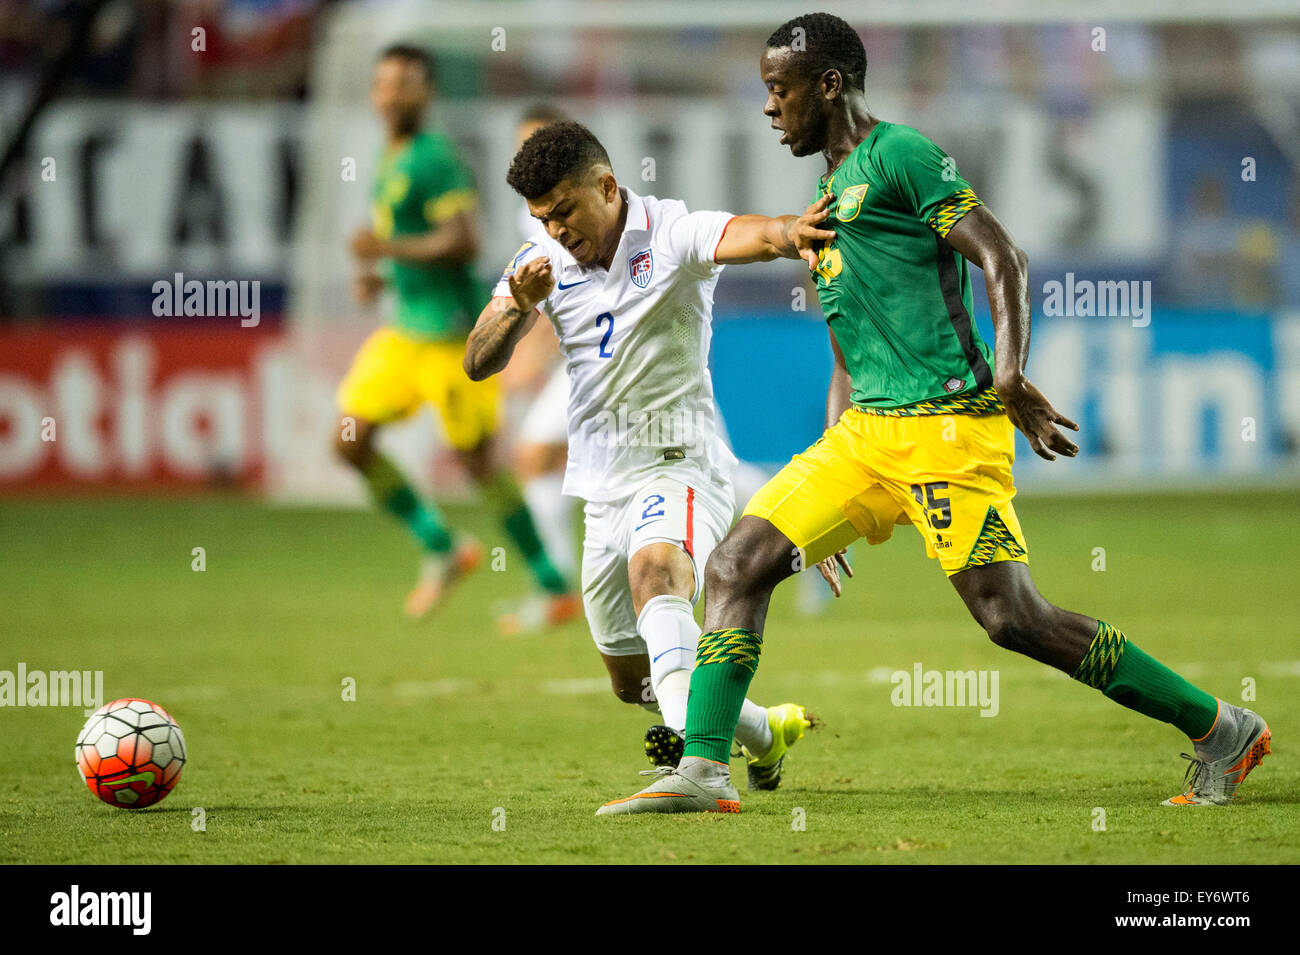 Atlanta, GA, USA. 22nd July, 2015. #2 USA M DeAndre Yedlin and #15 Jamaica M Je-Vaughn Watson during the CONCACAF Gold Cup semifinal match between USA and Jamaica at the Georgia Dome in Atlanta, GA. Jacob Kupferman/CSM/Alamy Live News Stock Photo